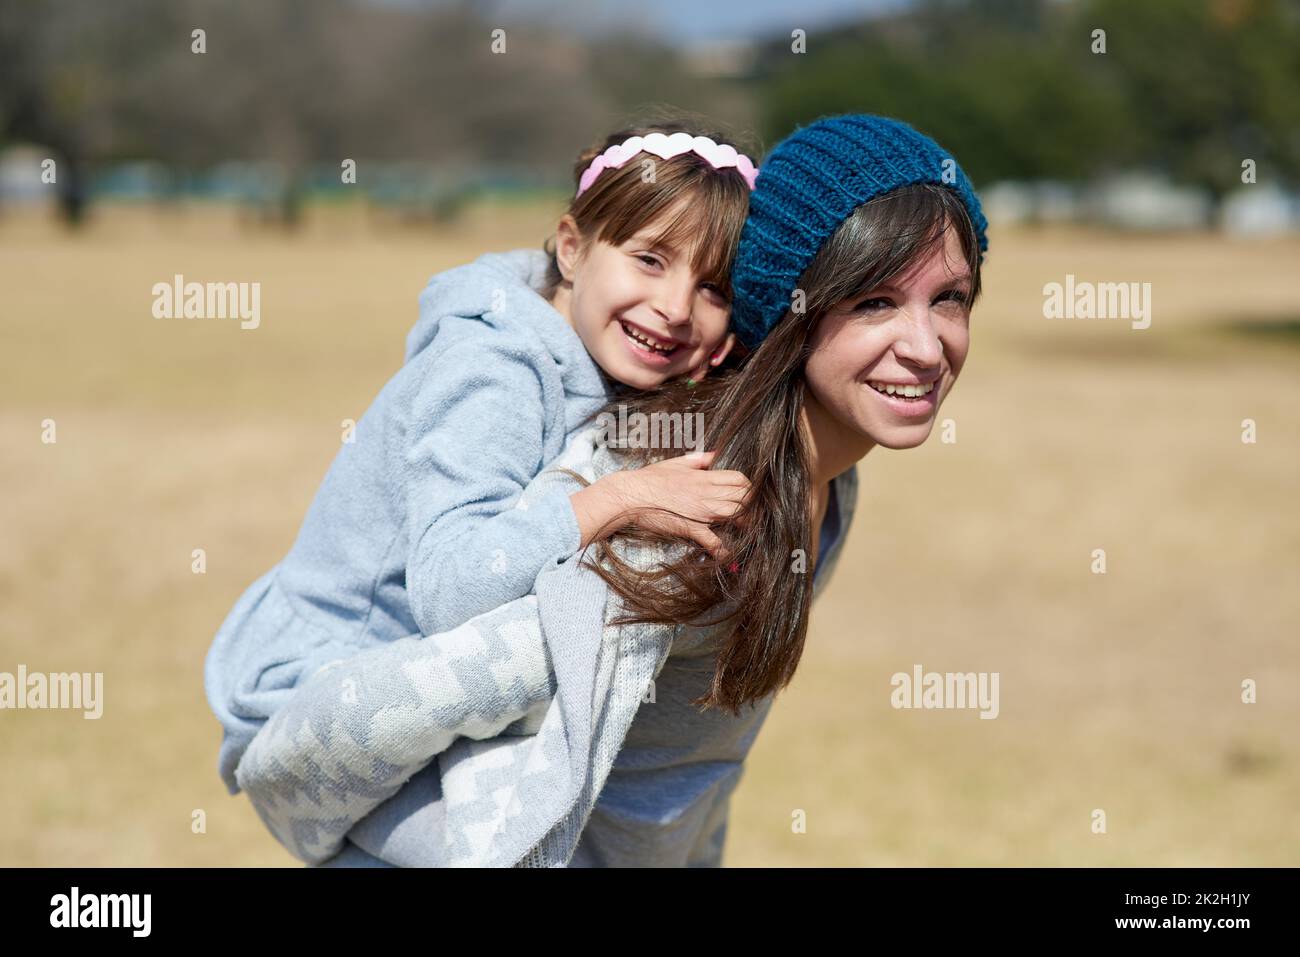 Being together is all that matters. Portrait of a mother and daughter bonding together at the park. Stock Photo